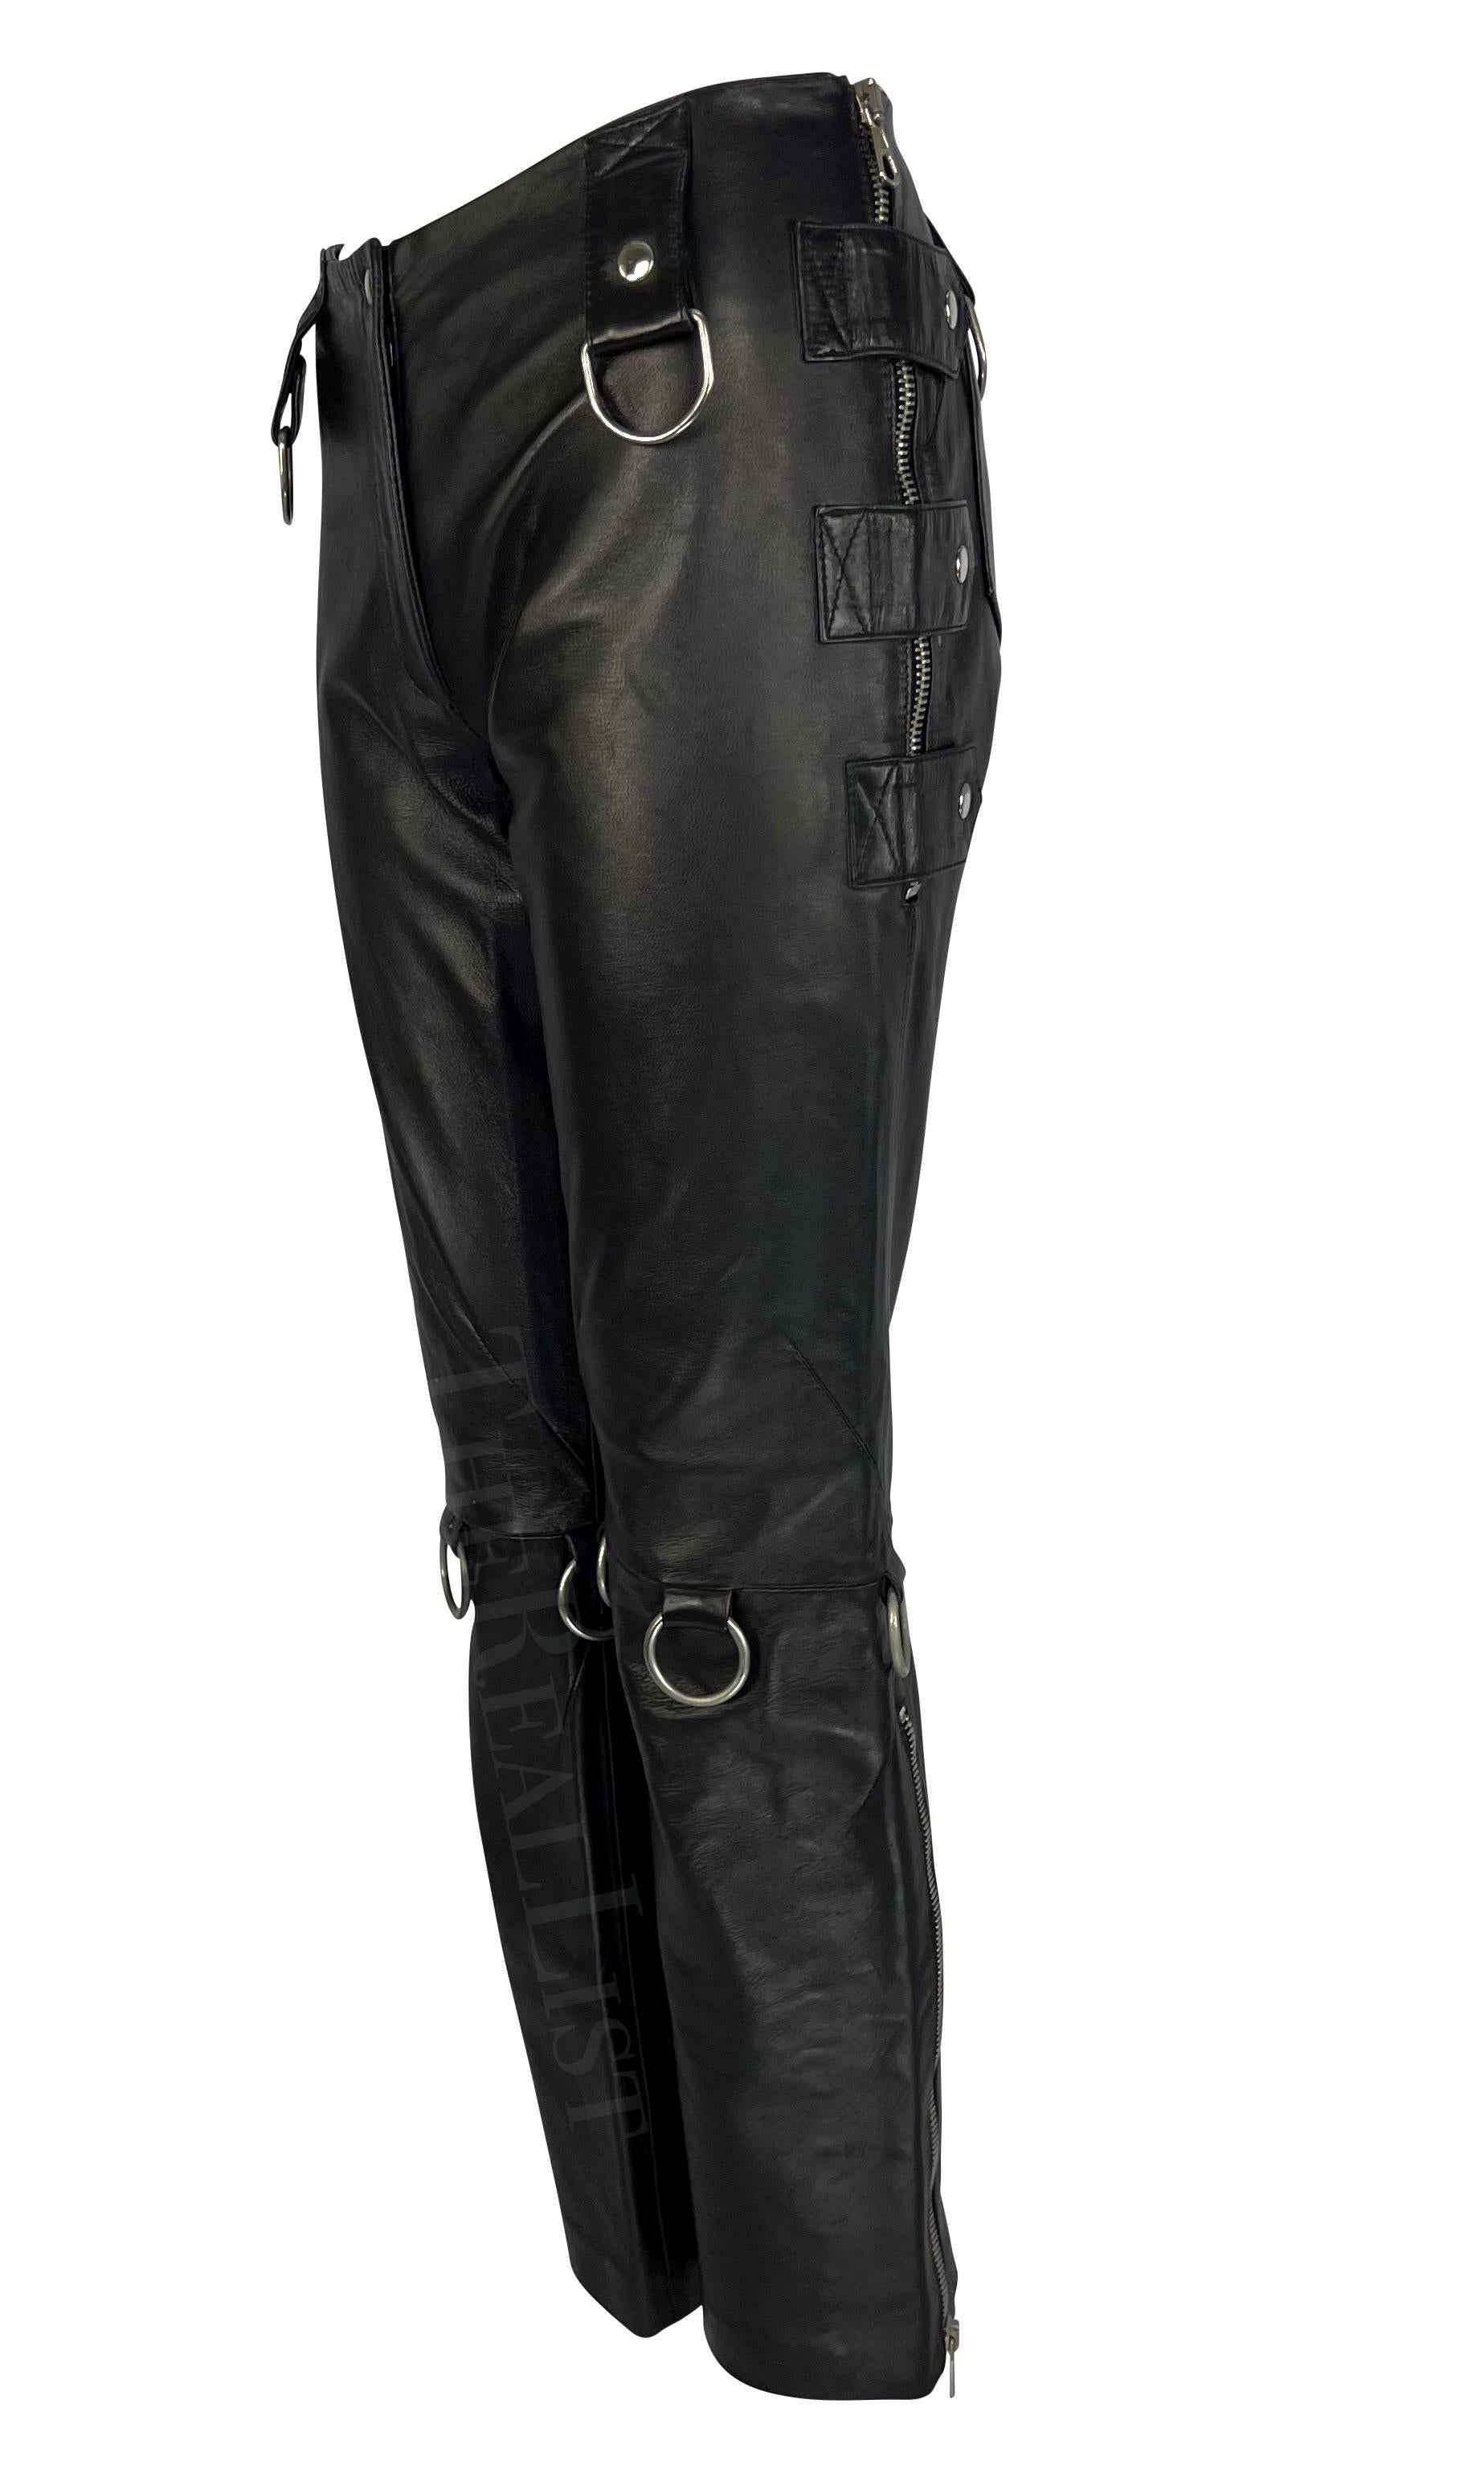 S/S 2000 Dolce & Gabbana Aaliyah Runway Black Leather Zipper Ring Moto Pants For Sale 1